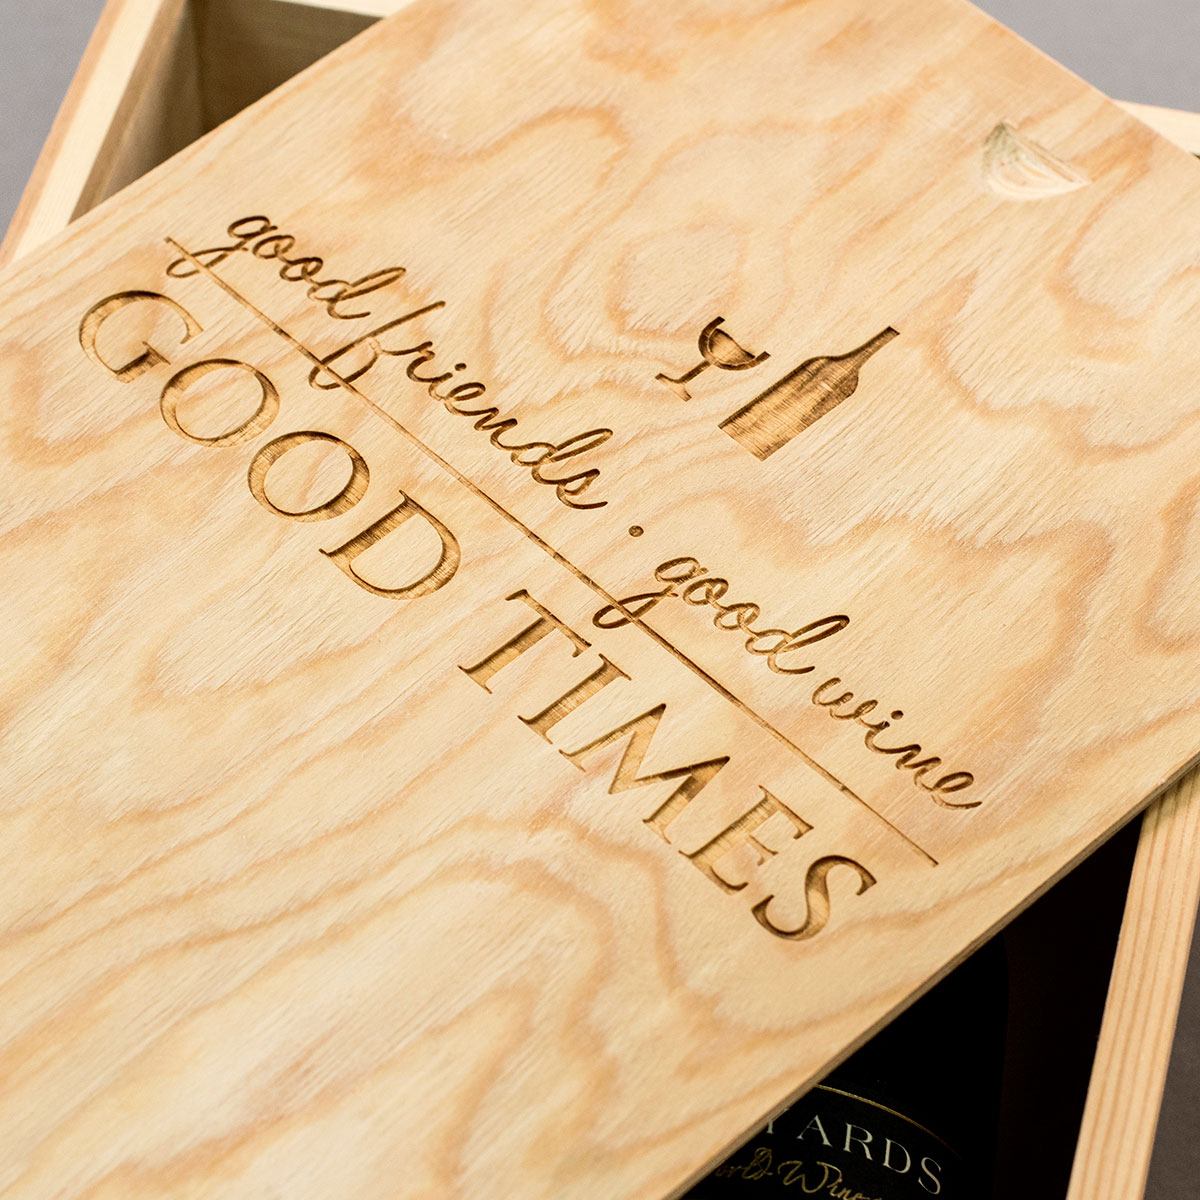 Personalised Two Bottle Wooden Wine Box - Good Friends, Good Wine, Good Times